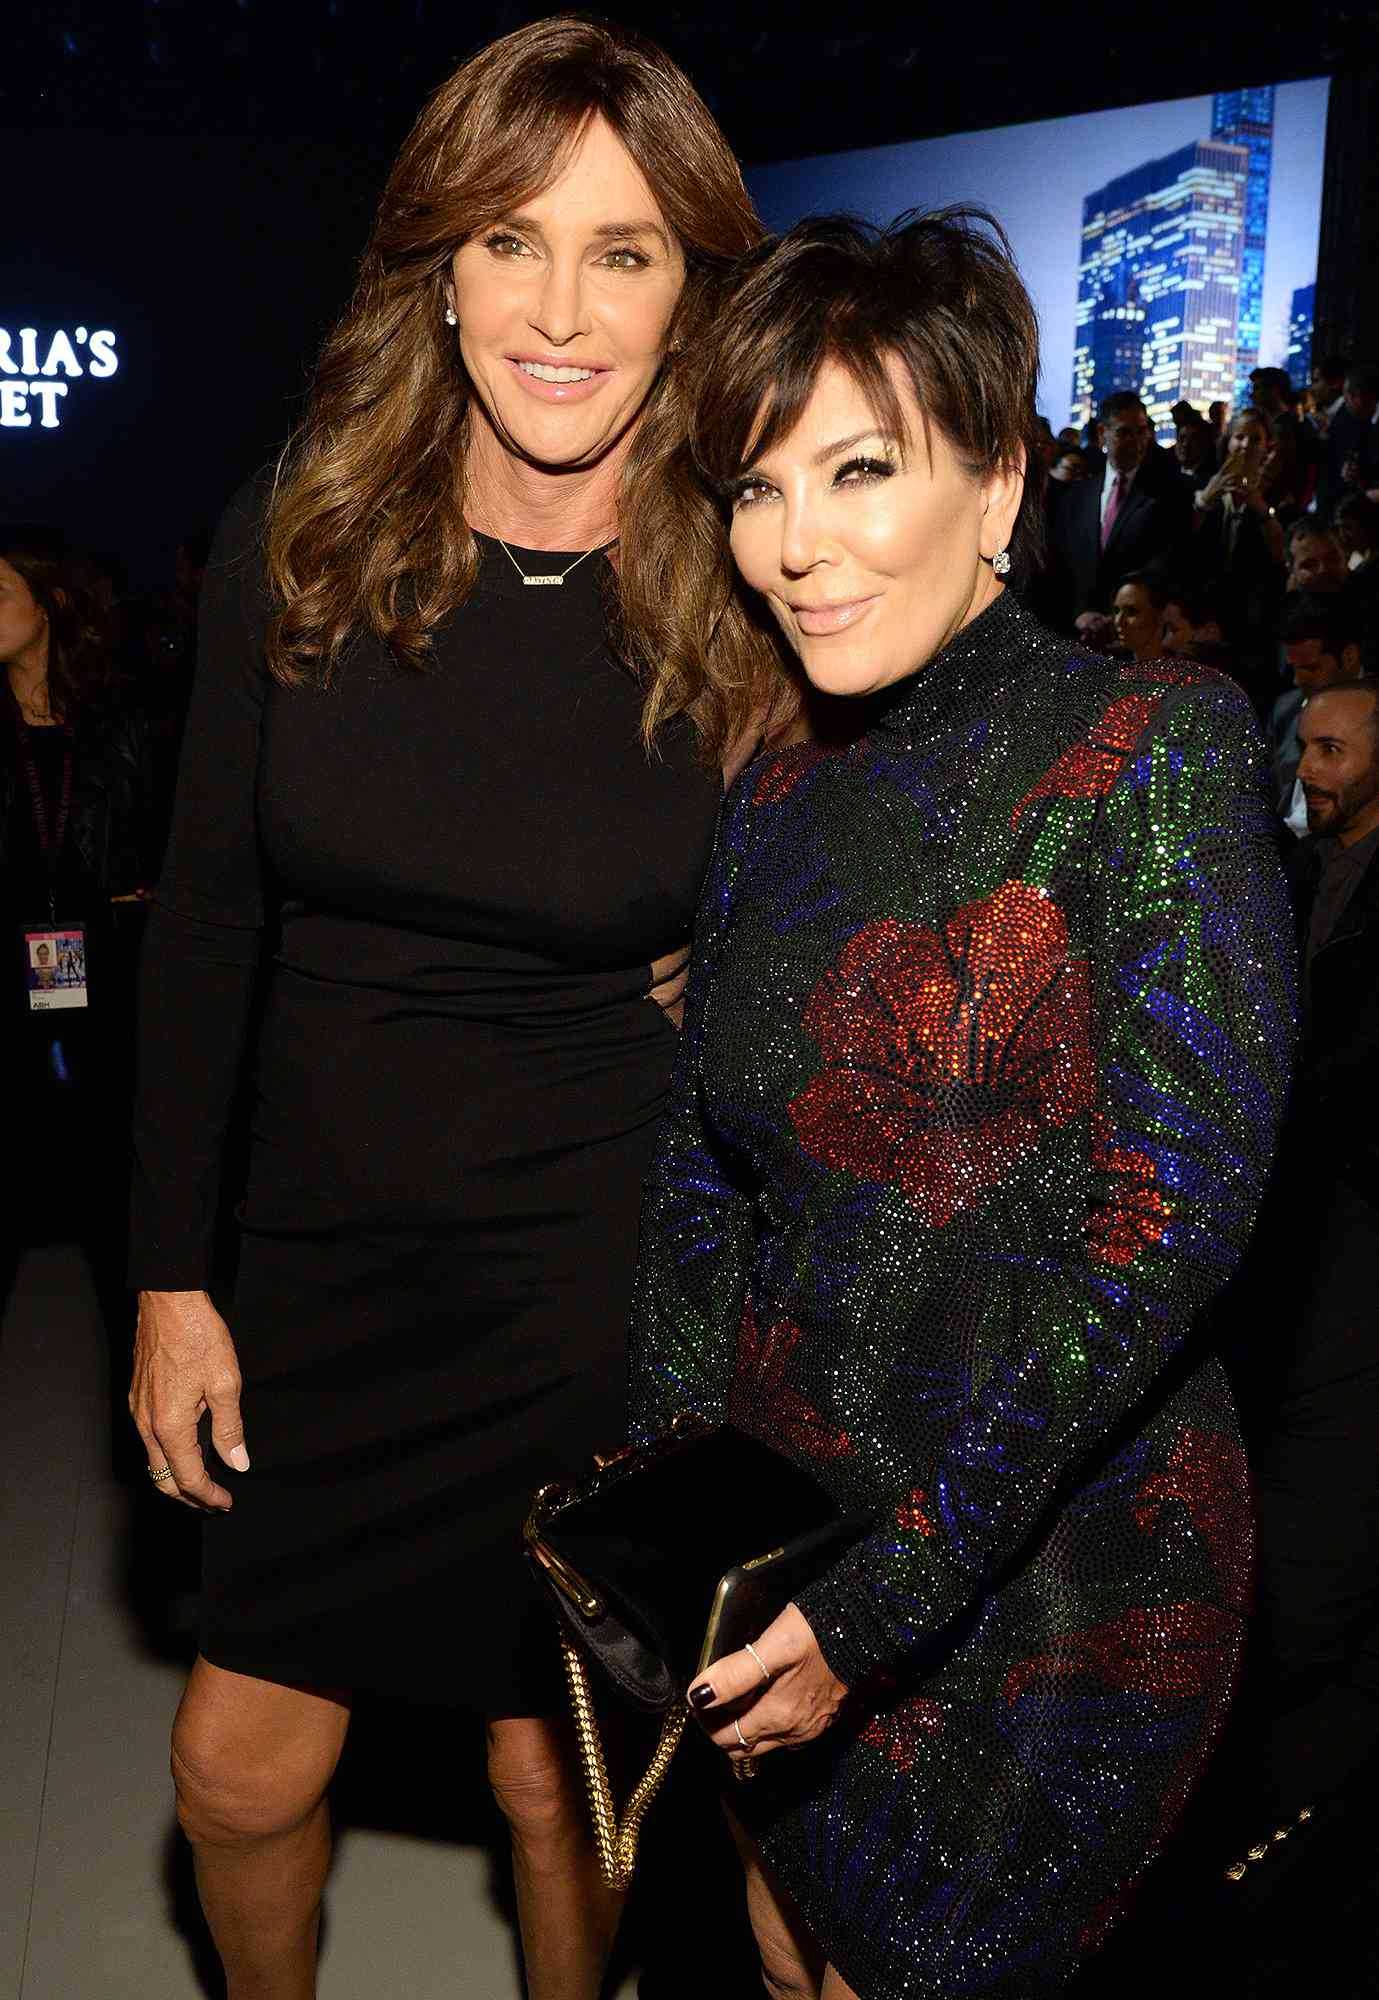 Caitlyn Jenner and Kris Jenner (Source: People)